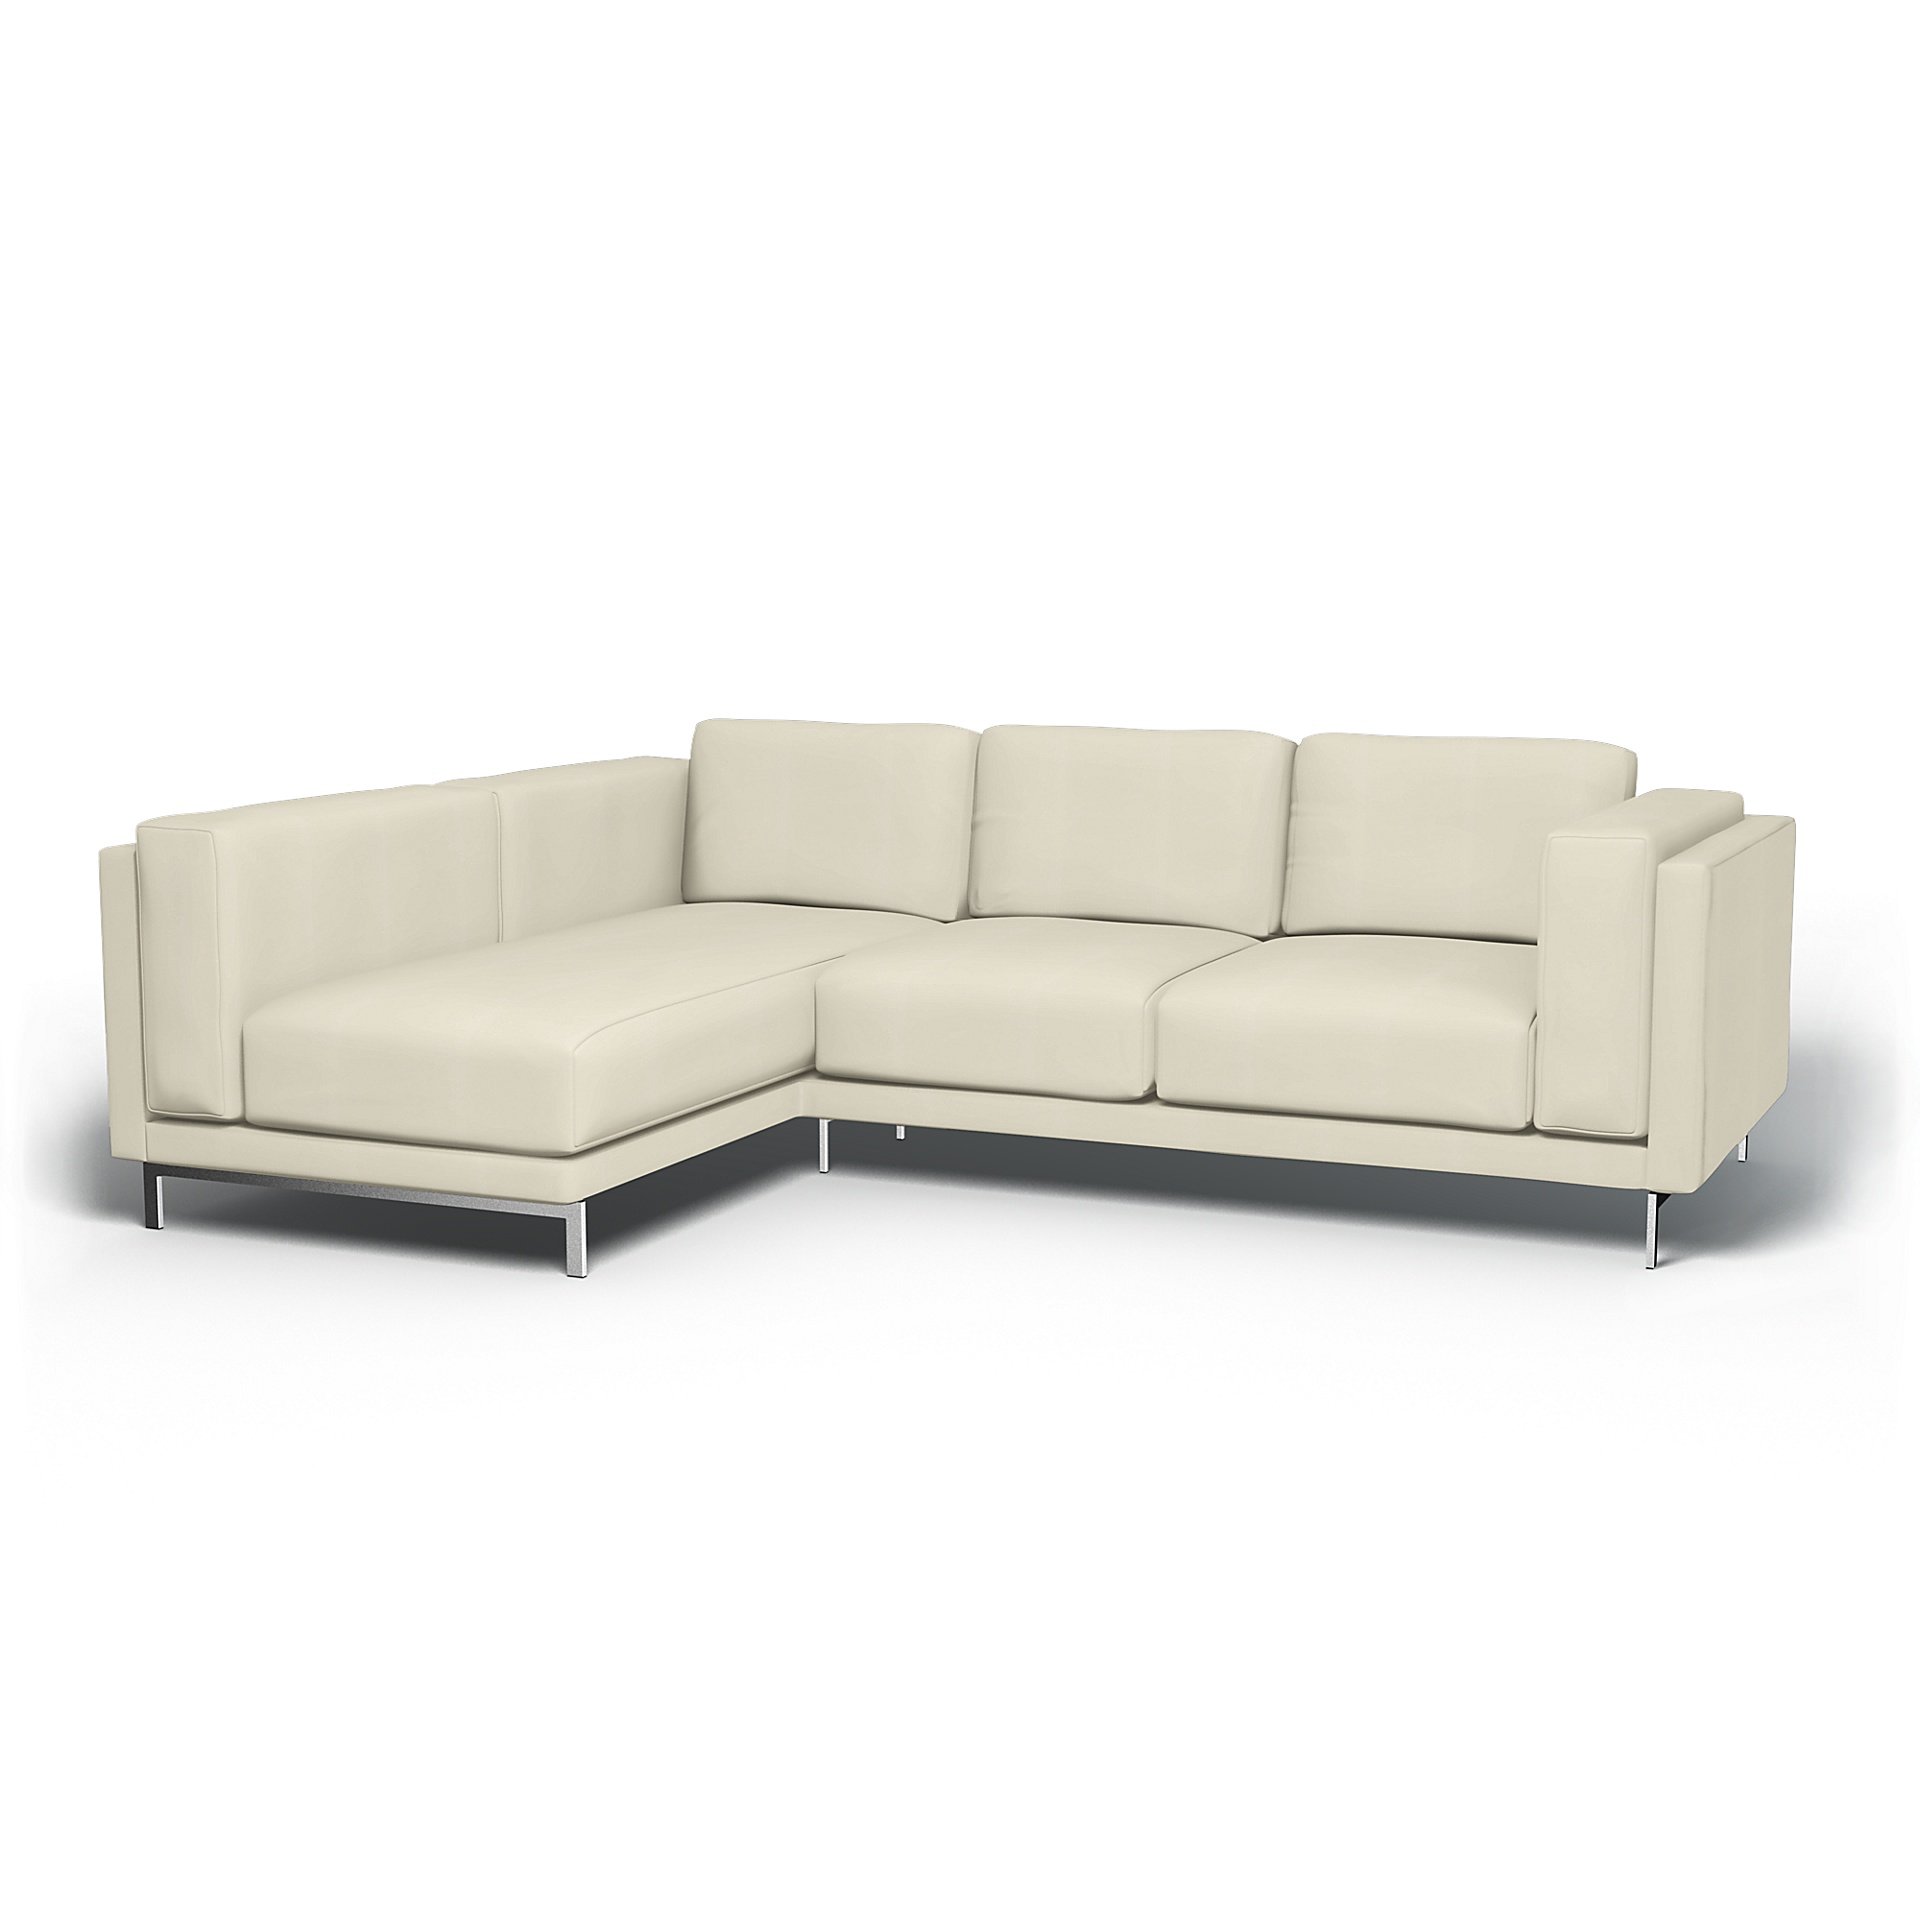 IKEA - Nockeby 3 Seater Sofa with Left Chaise Cover, Tofu, Cotton - Bemz